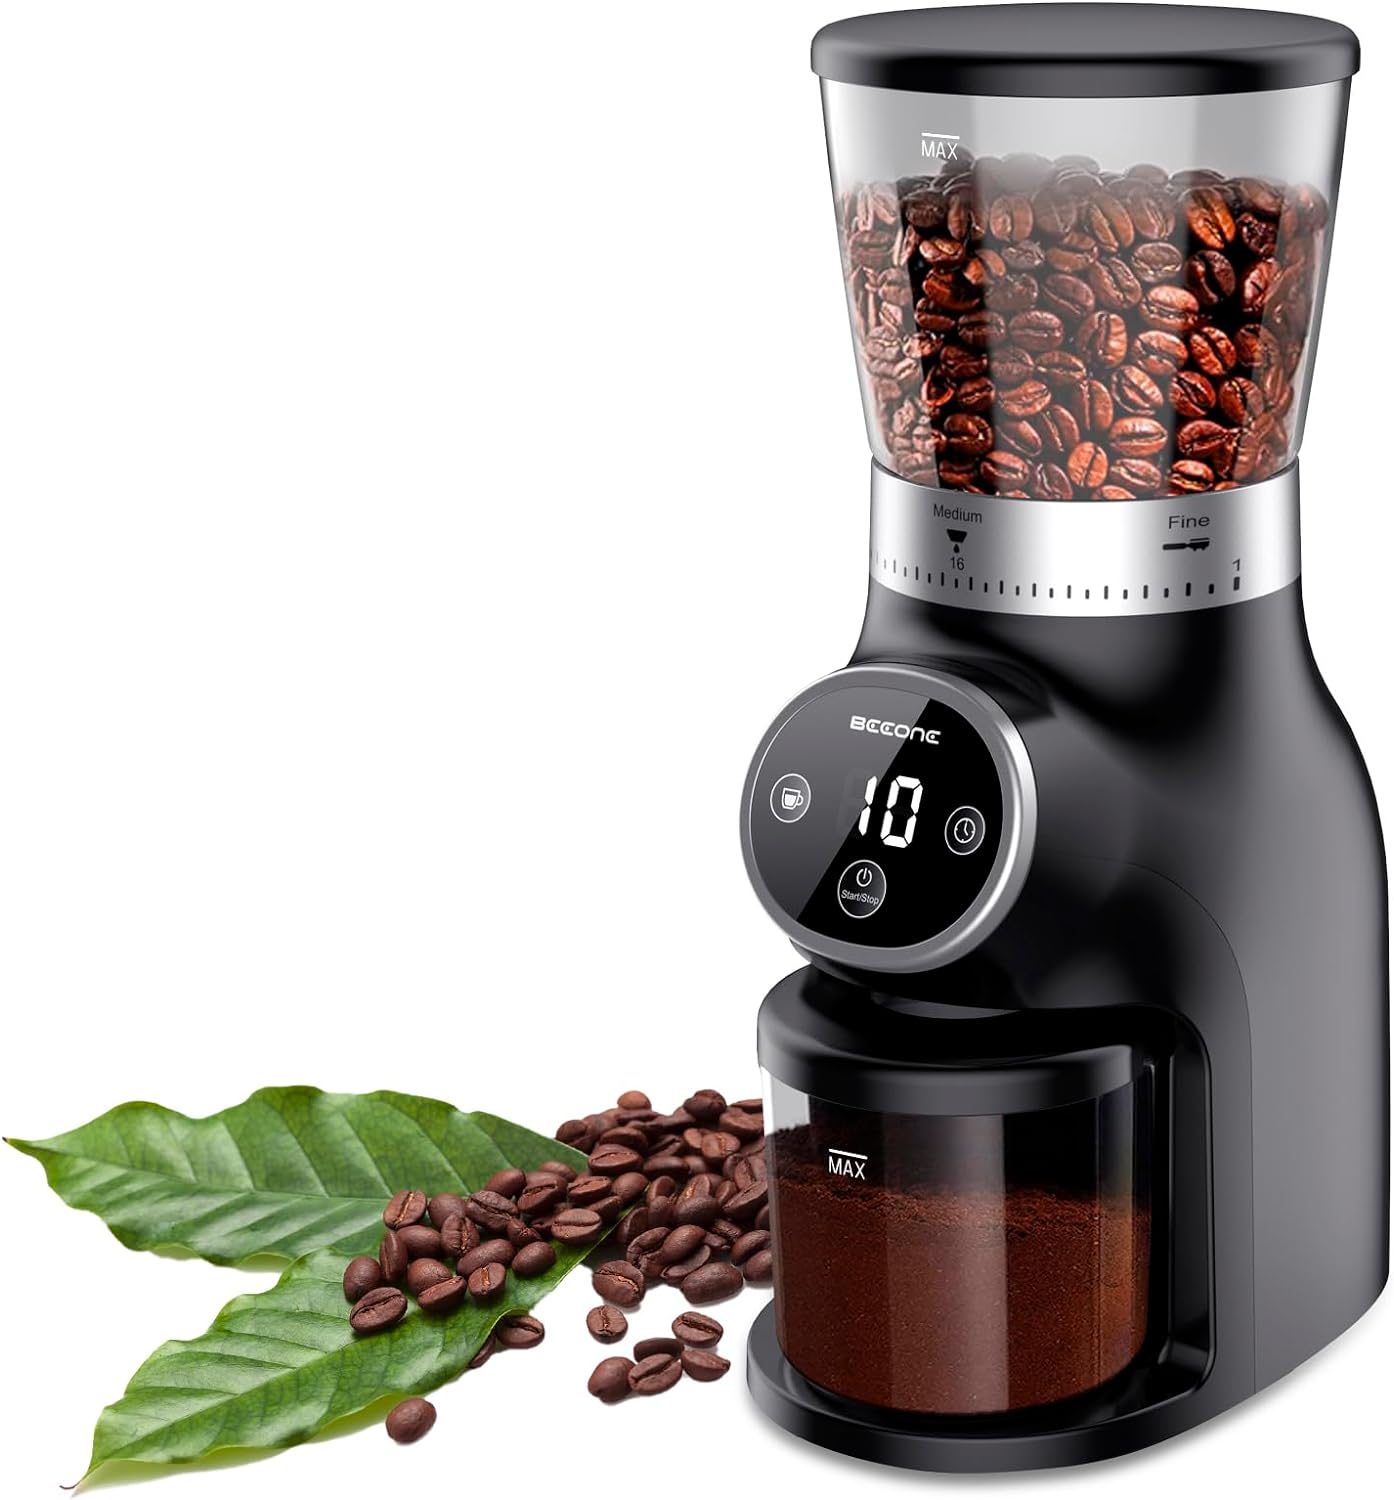 https://bigbigmart.com/wp-content/uploads/2023/10/Electric-Burr-Coffee-Grinder-with-Digital-Control-BEEONE-Espresso-Grinder-with-31-Precise-Settings-for-1-10-Cups-Coffee-Grinder-Electric-with-Time-Display-Black.jpg